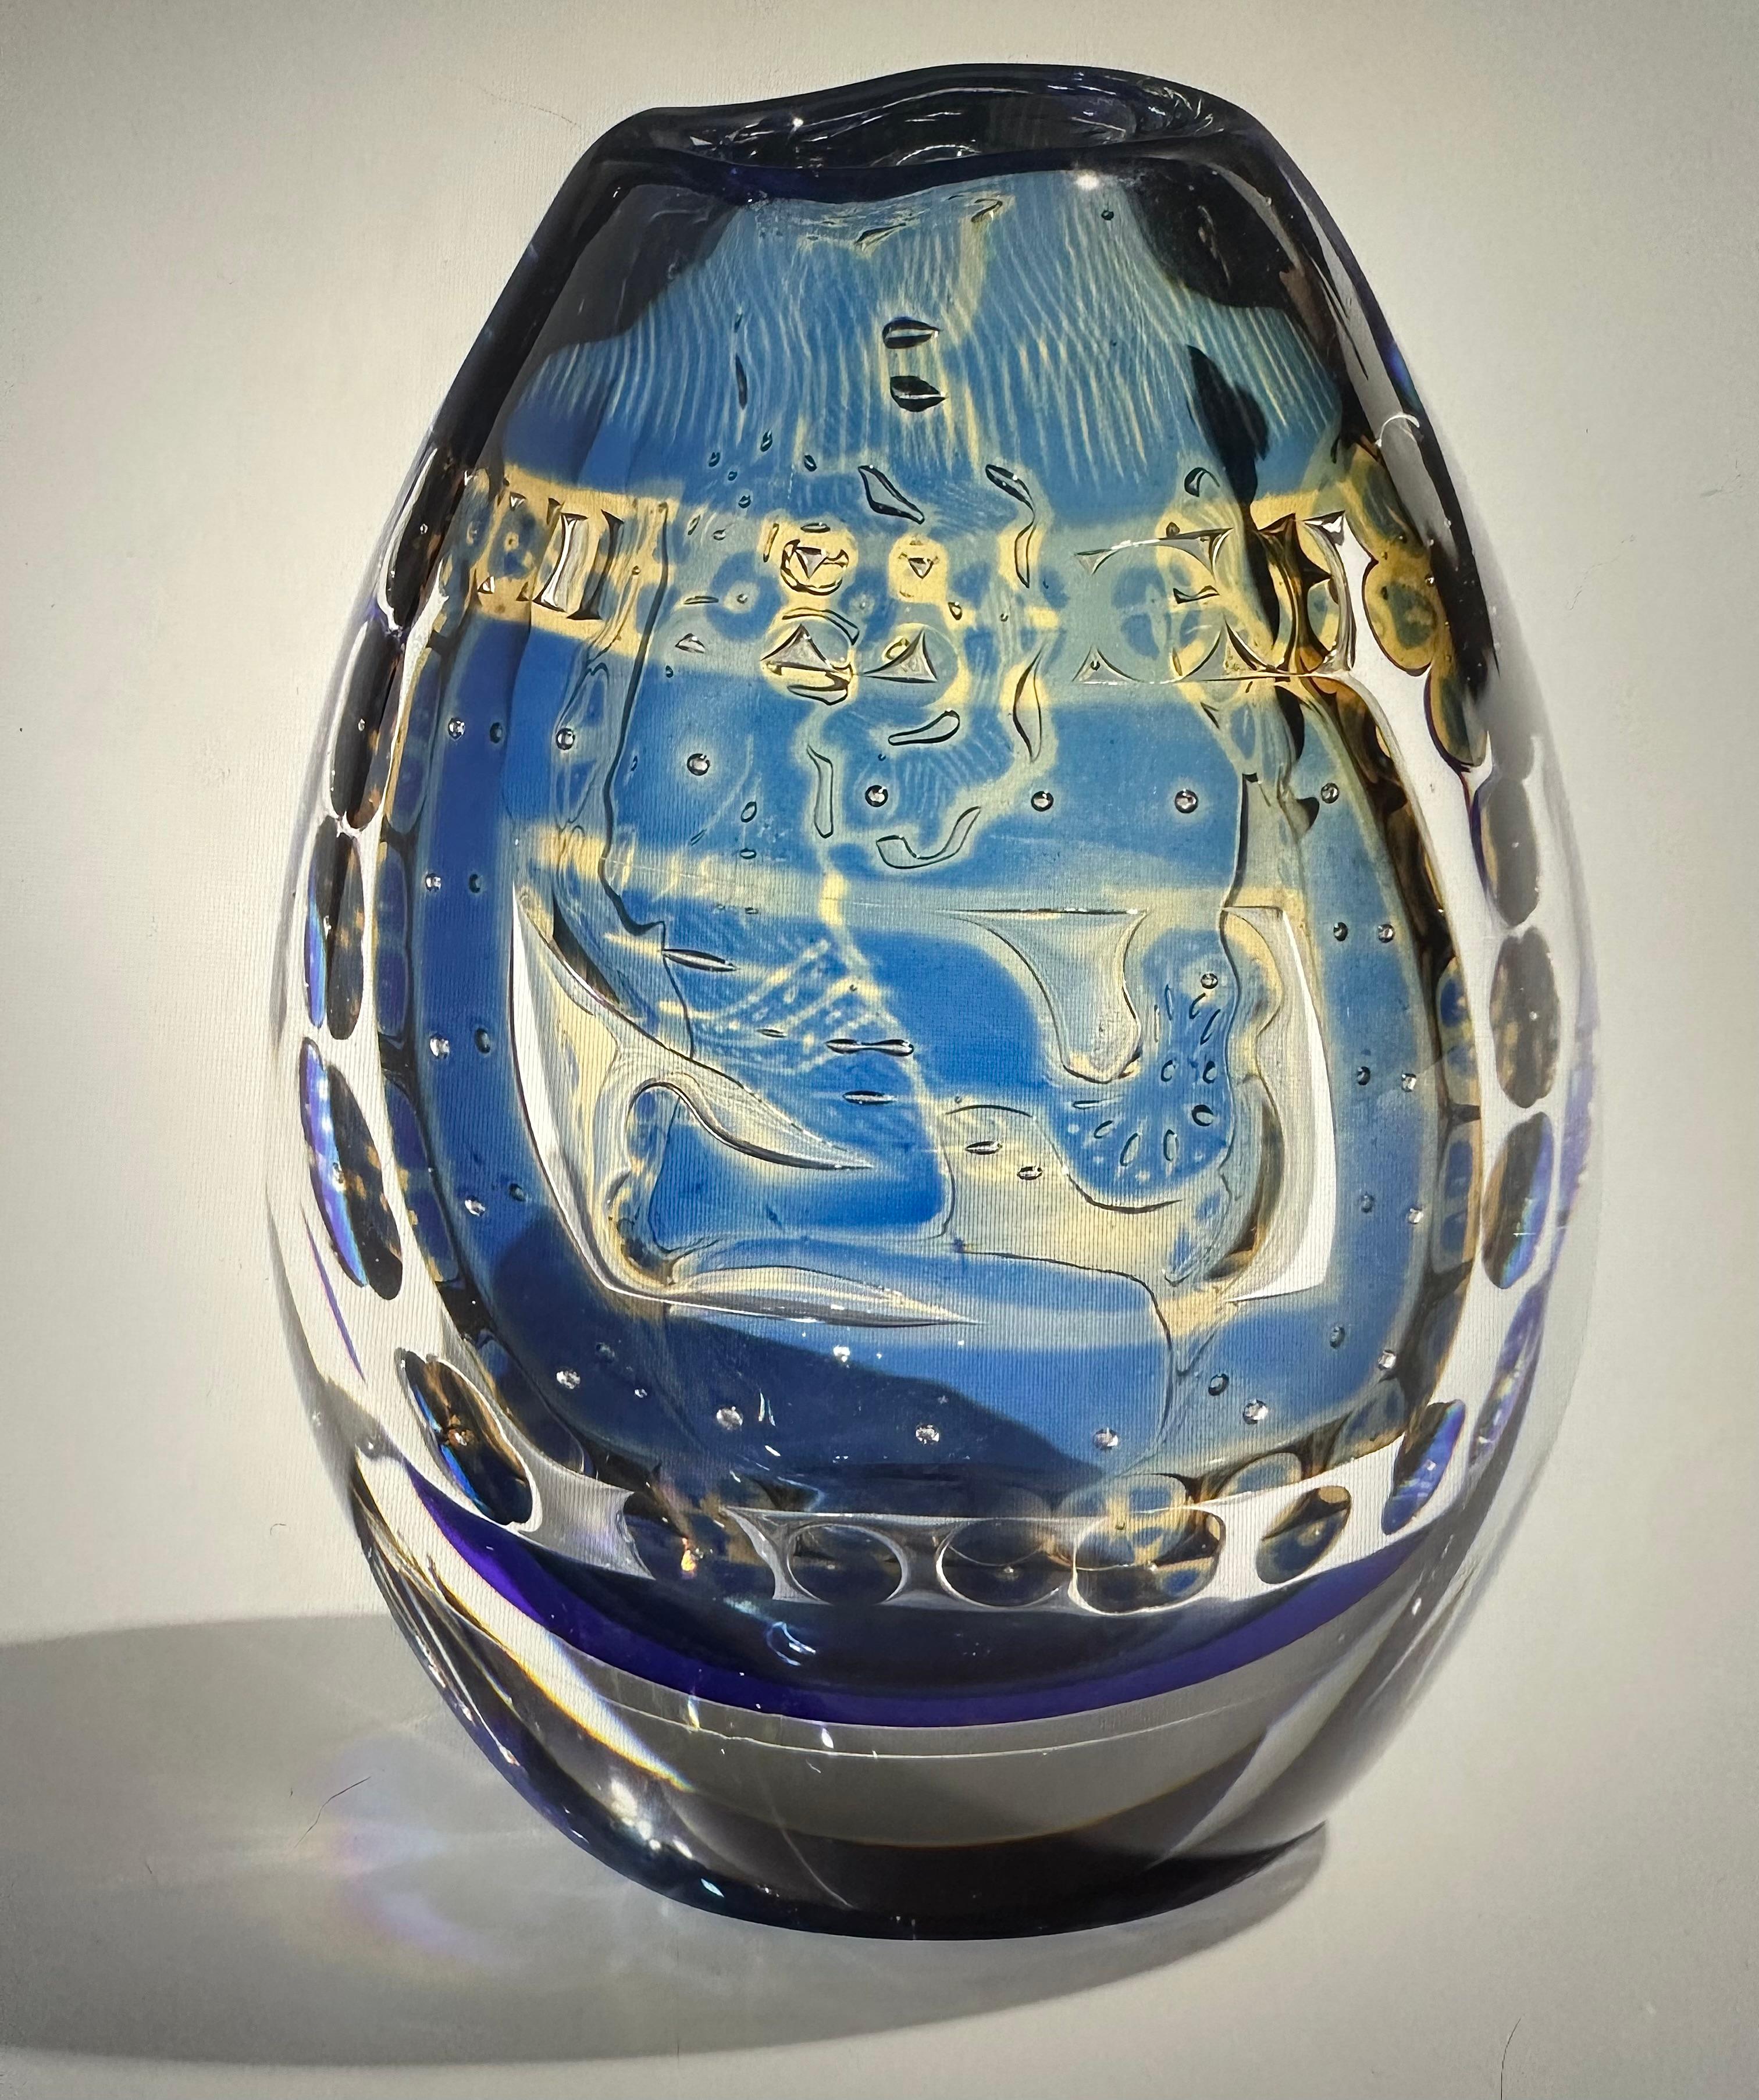 Mid-Century Modern Edvin Ohrstrom Orrefors Ariel Art Glass Vase in vibrant blue and yellow Signed  For Sale